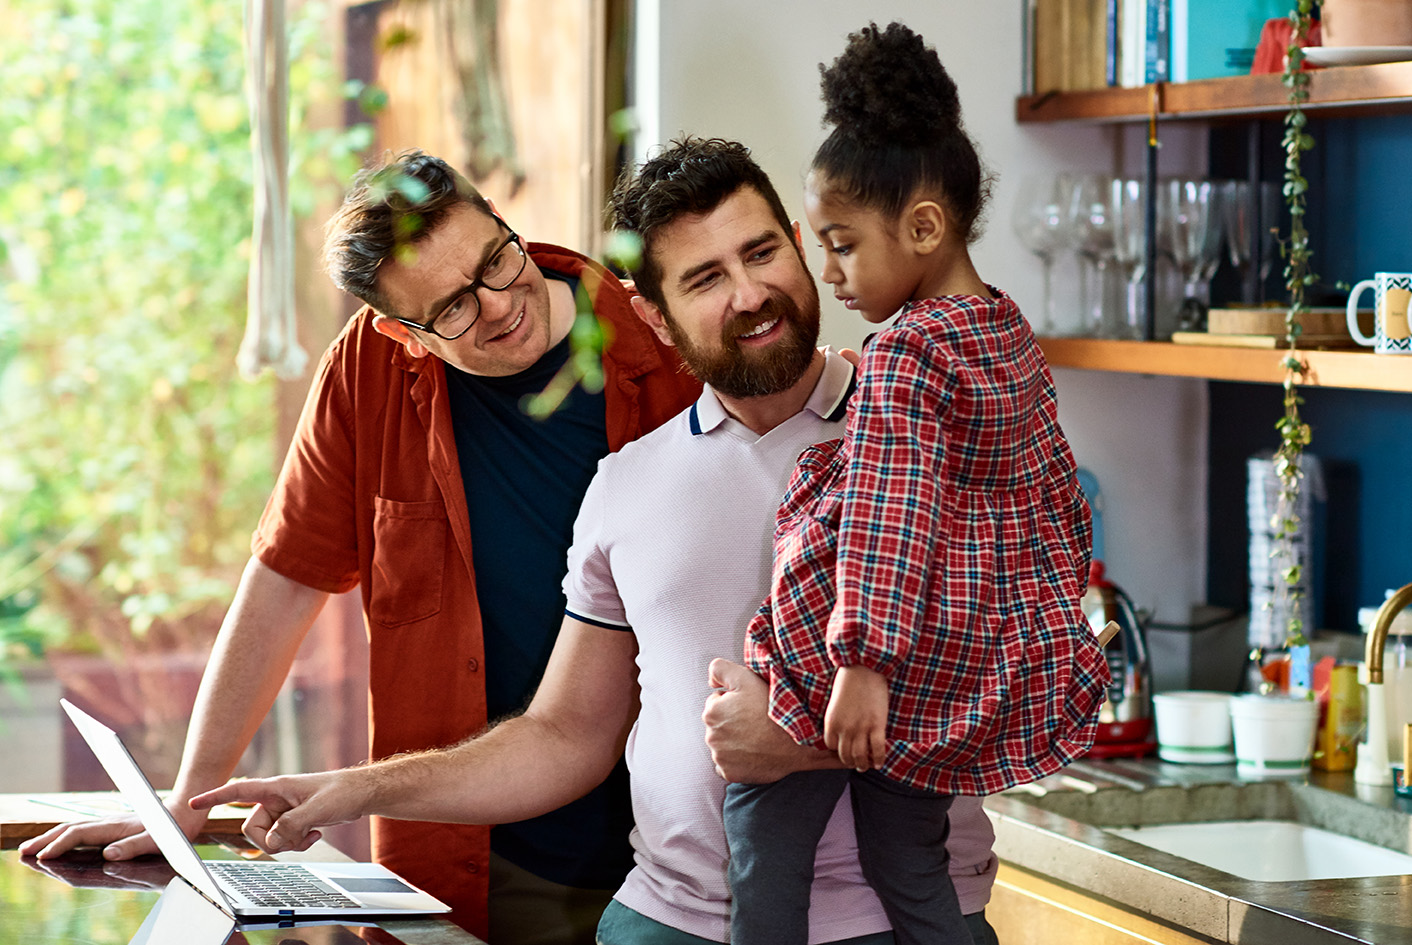 Three people stand in a home kitchen, focused on a laptop screen. A man with a beard holds a young girl in his arms, while another man points at something on the screen. They are all engaged and appear to be in a positive, comfortable home environment.